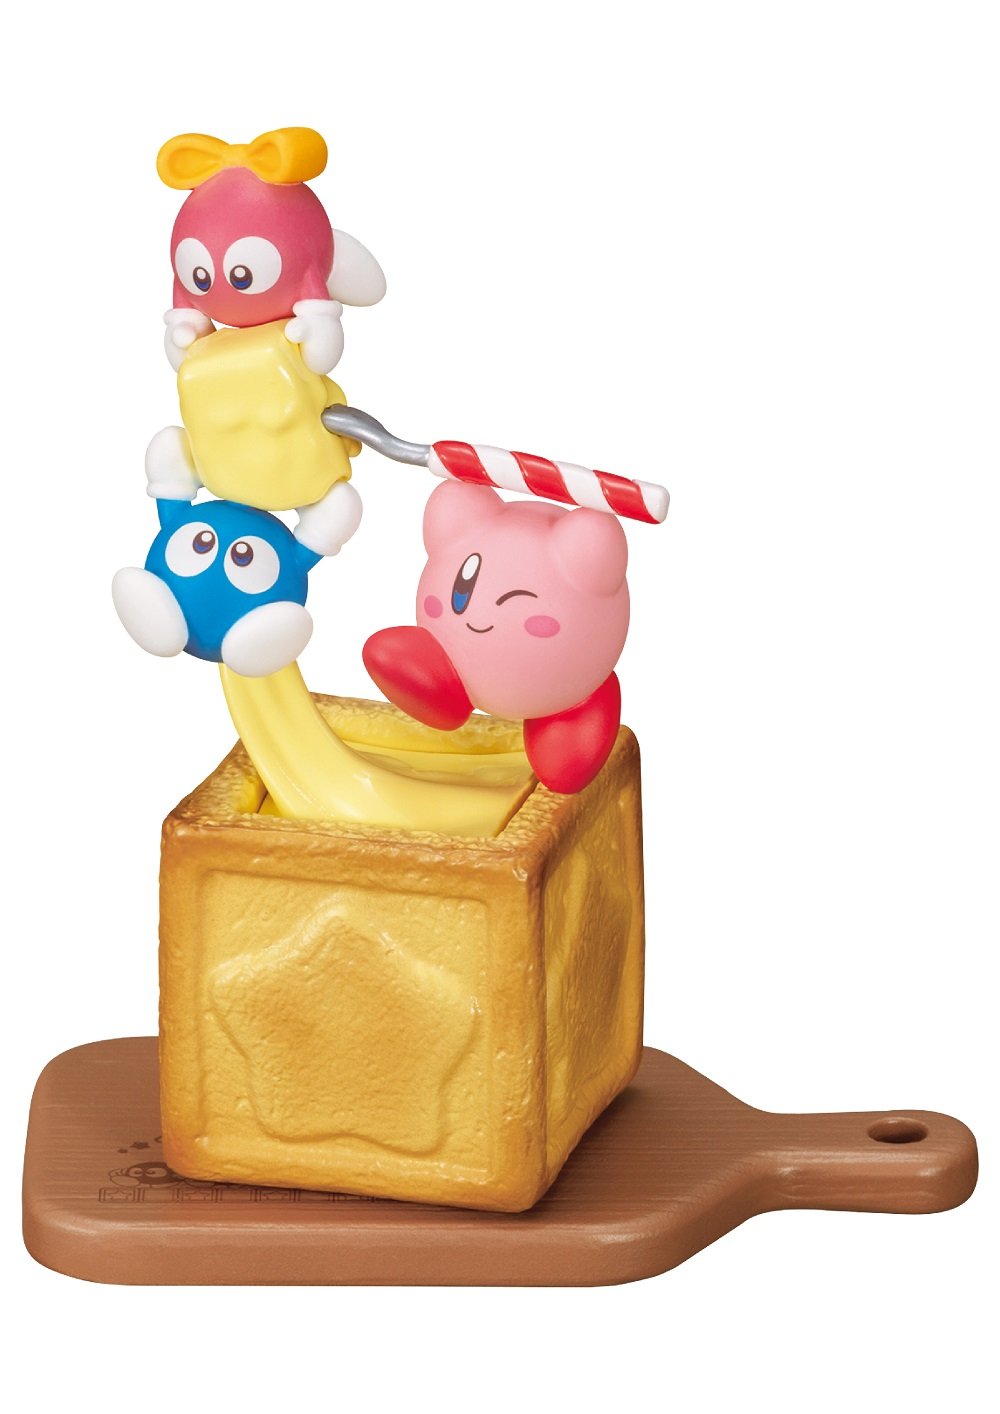 Kirby - Bakery Cafe Blind image count 5